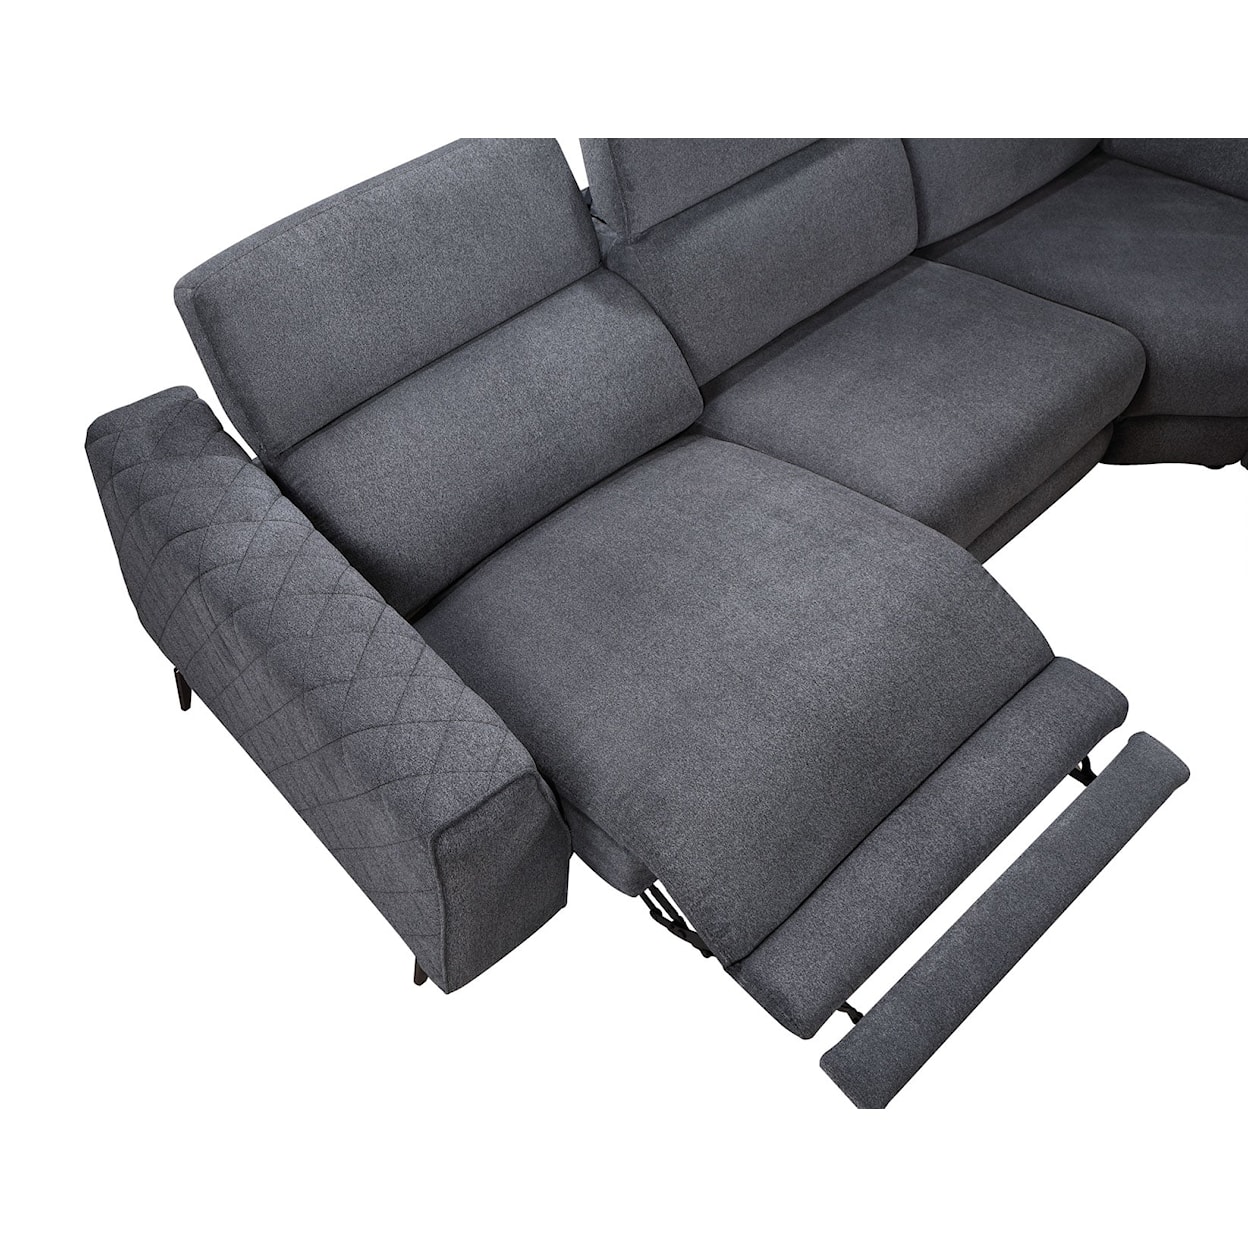 Steve Silver Assisi Sectional Sofa